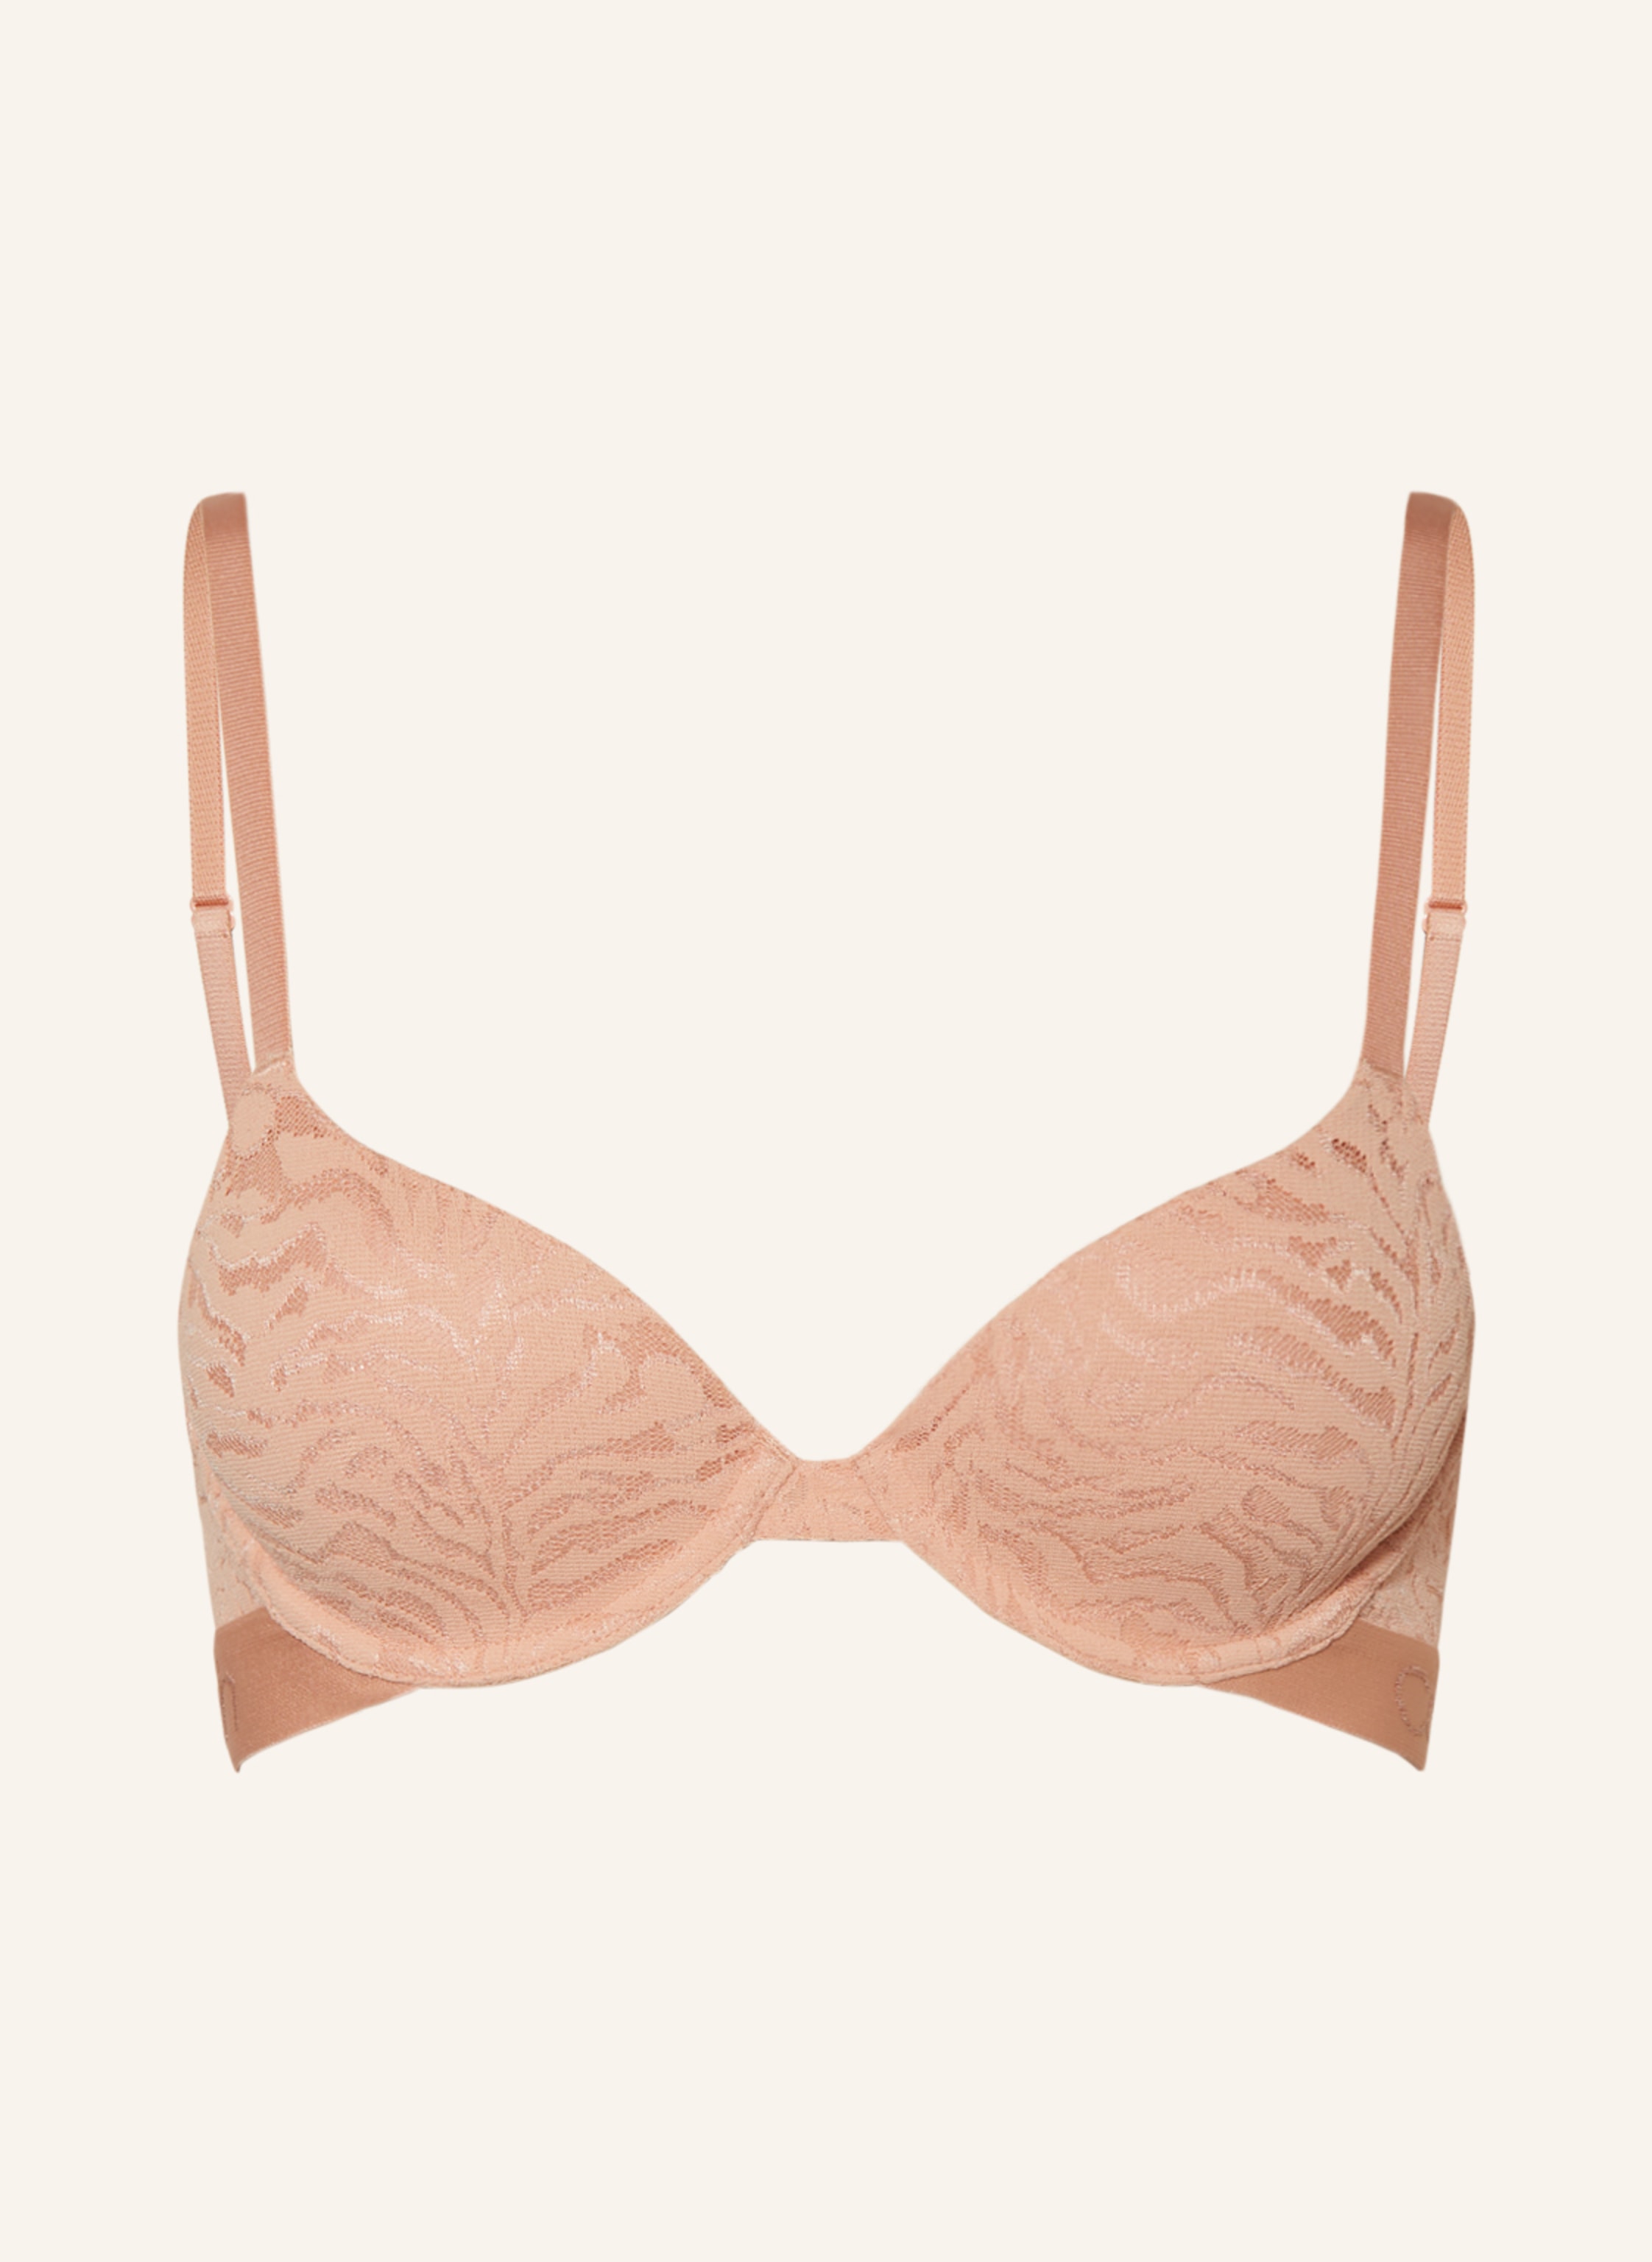 Buy Calvin Klein Pink Sheer Marquisette T-Shirt Bra from Next Luxembourg